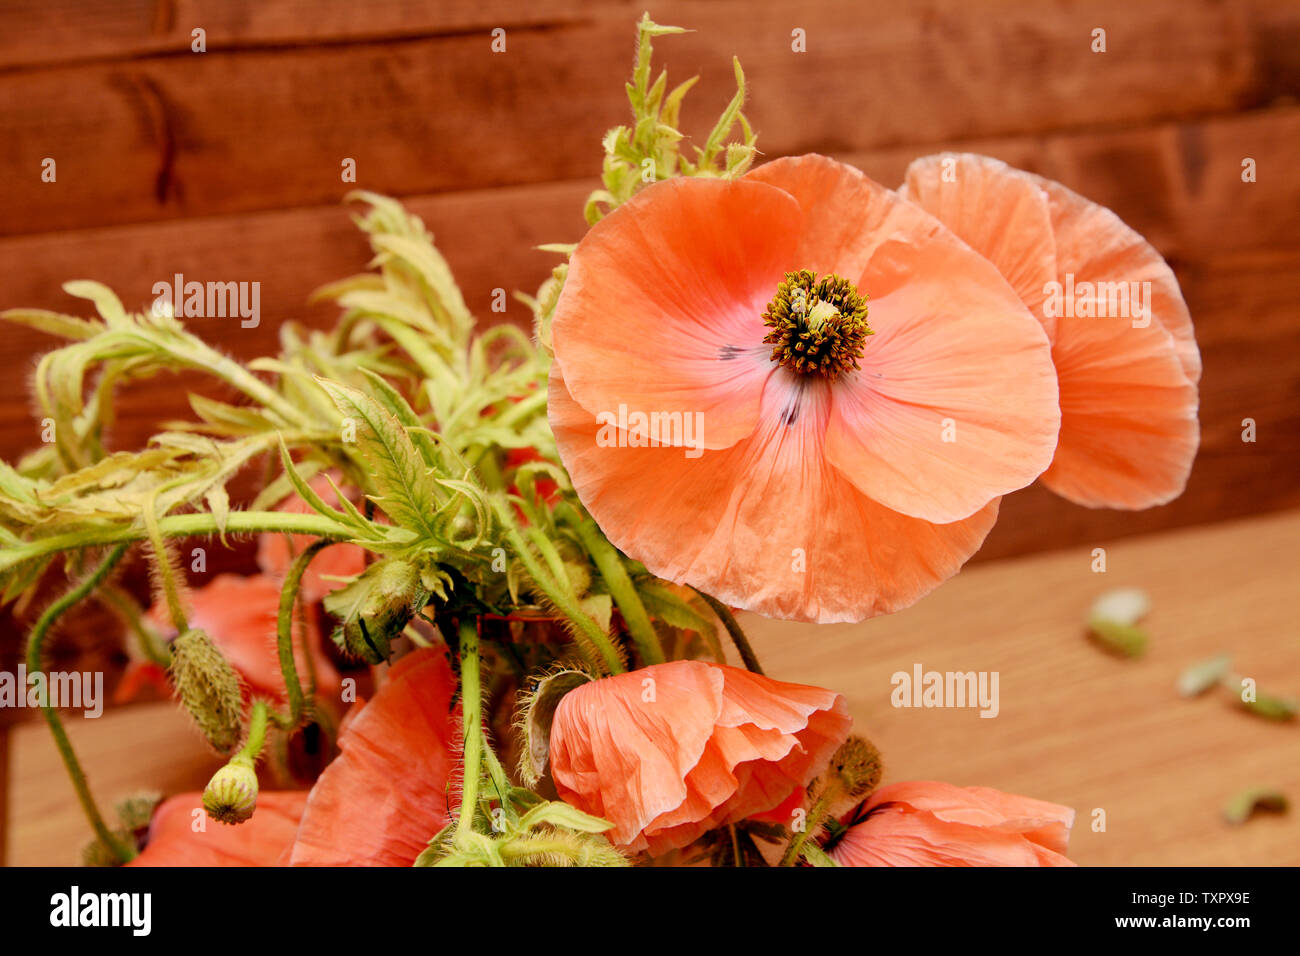 Pink poppy in selective focus among tangled foliage and flowers against a wooden background Stock Photo